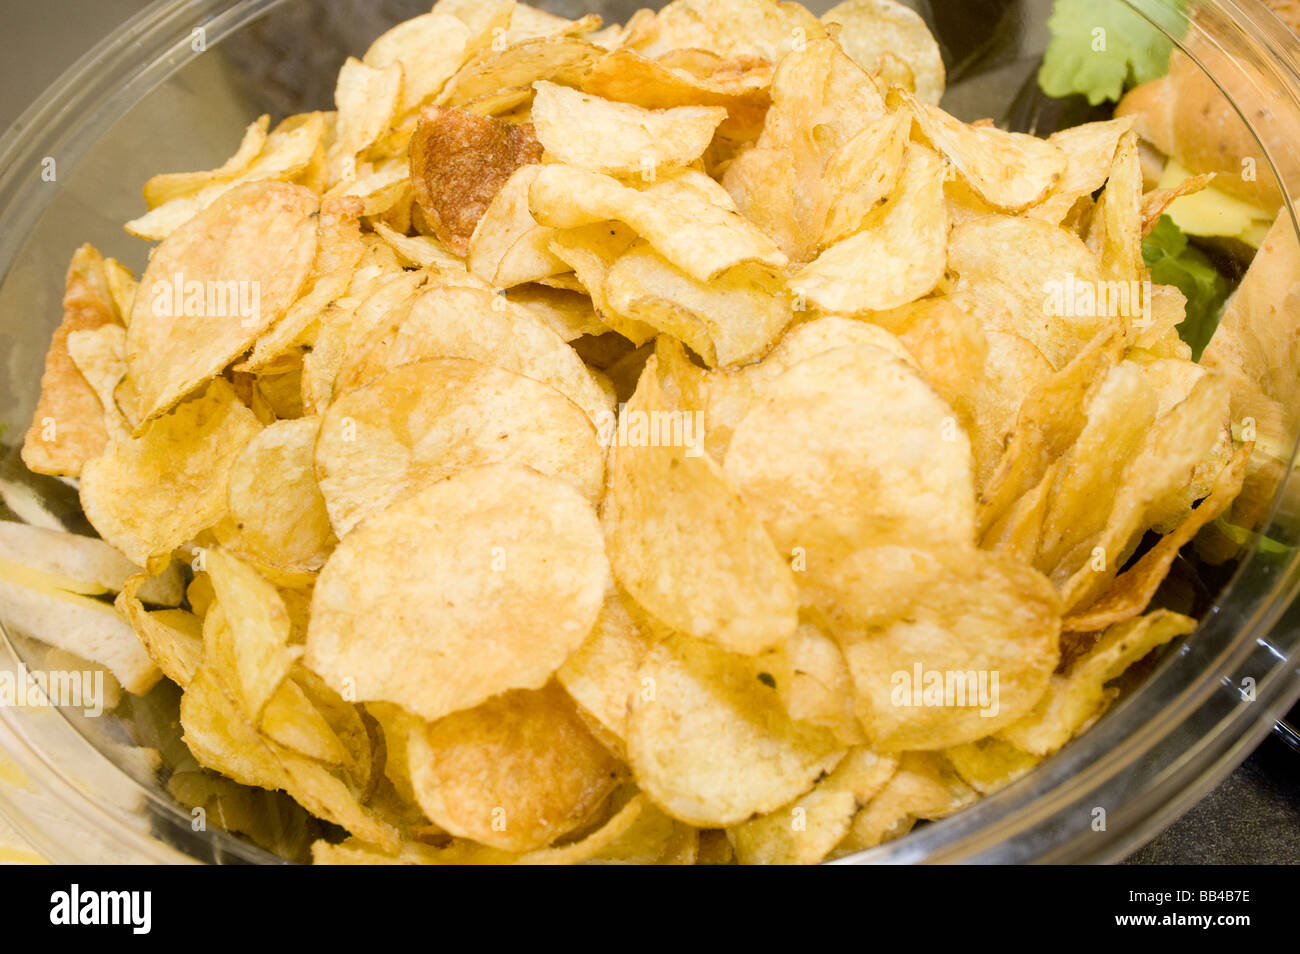 Bowl of crisps provided as party food at a family celebration Stock Photo